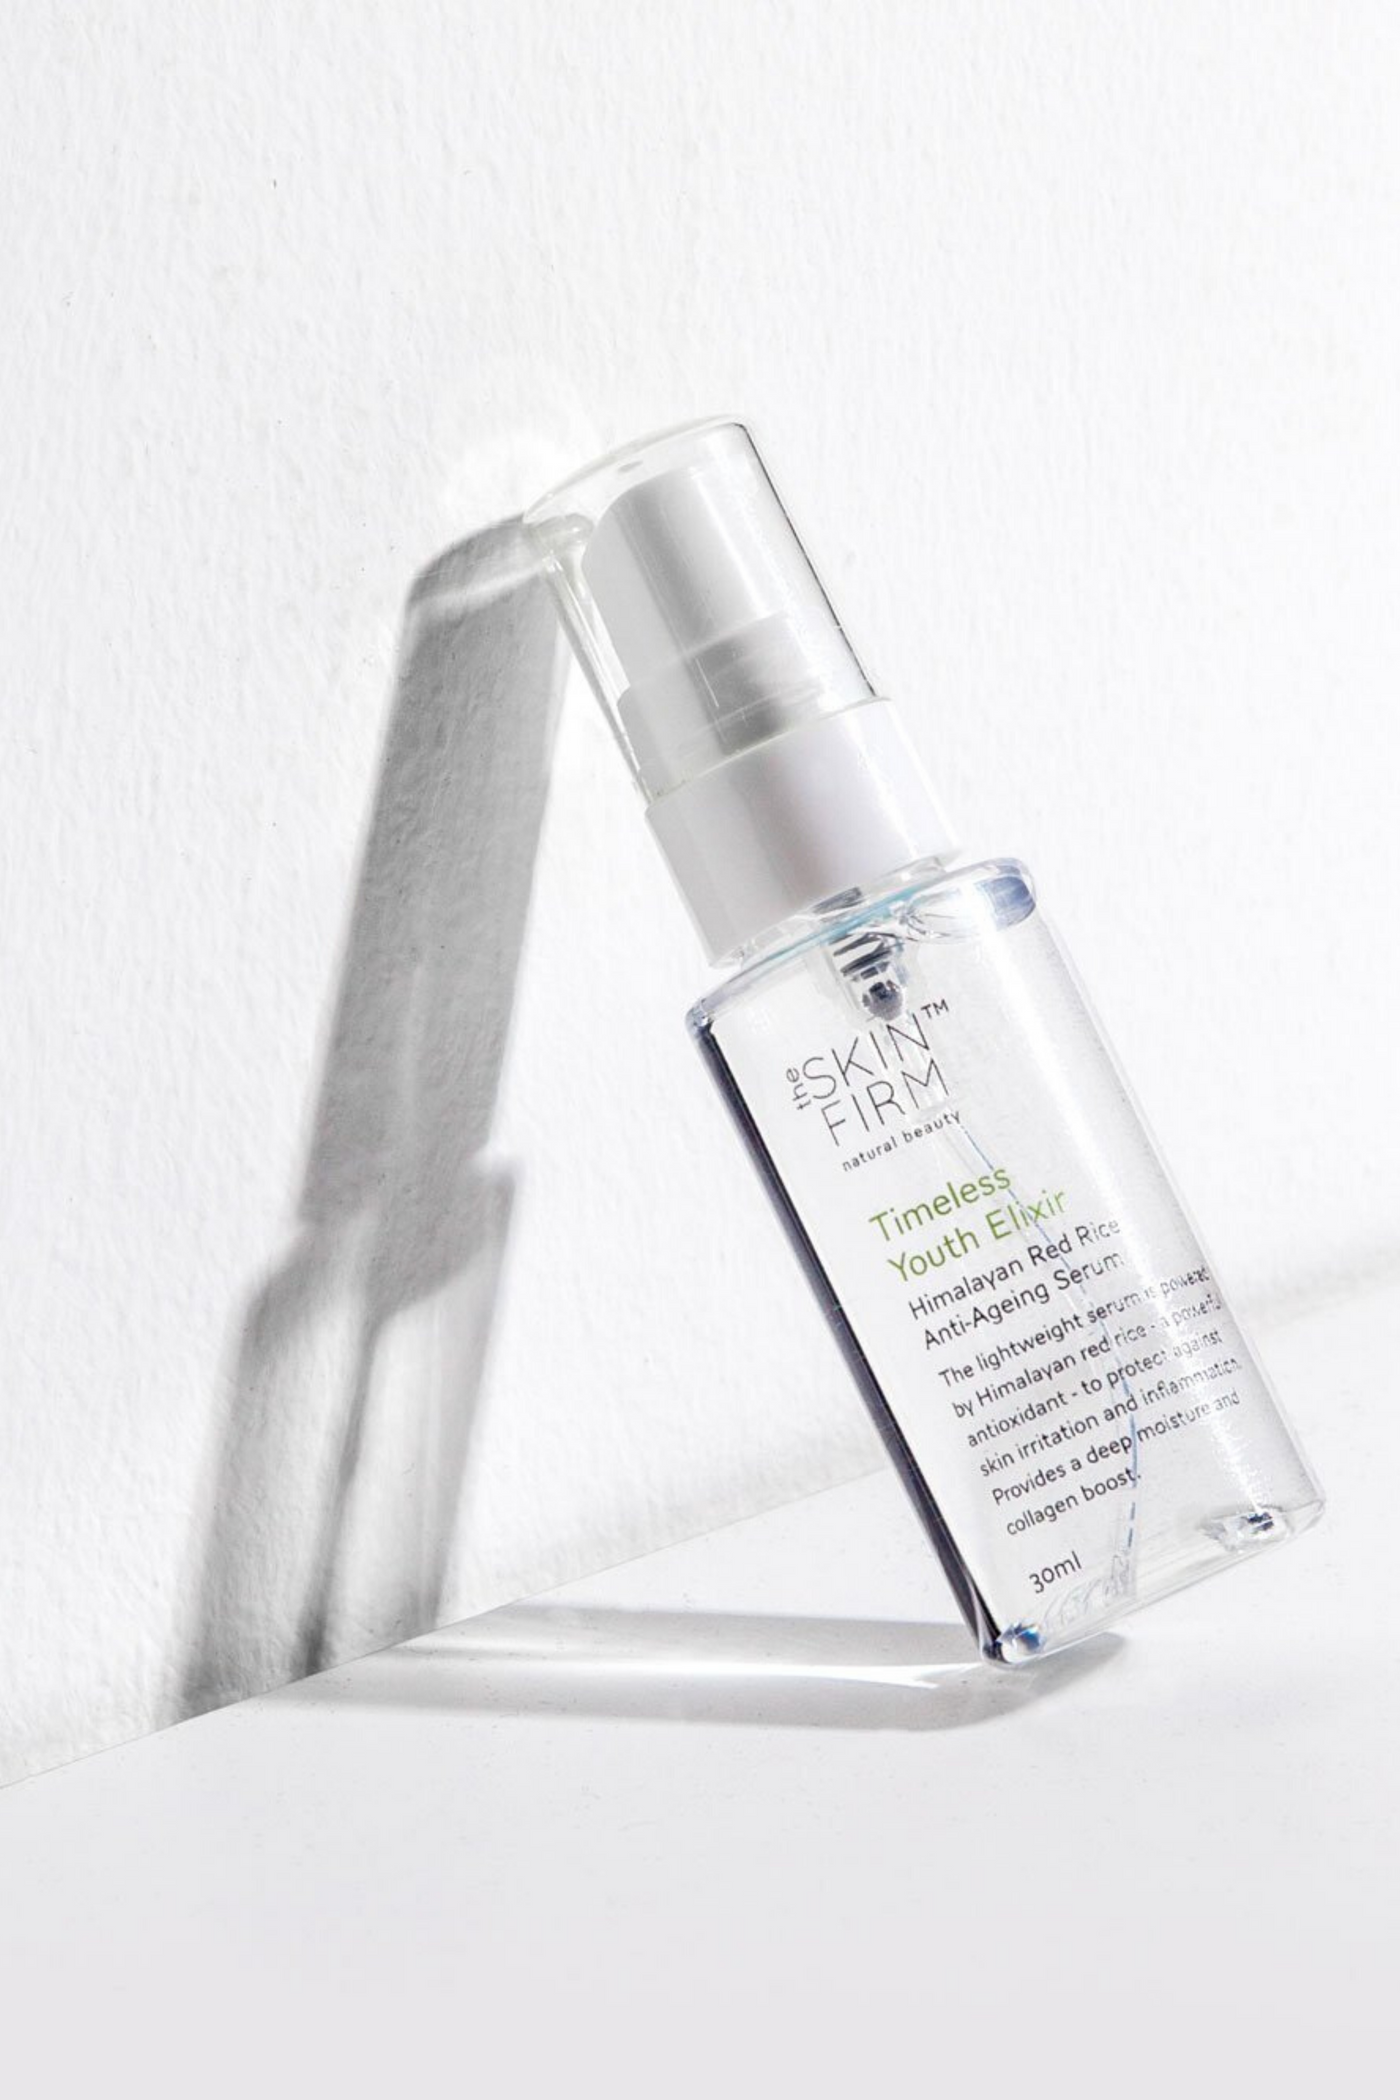 Natural skincare online The Skin Firm Timeless Youth Elixir on ZERRIN